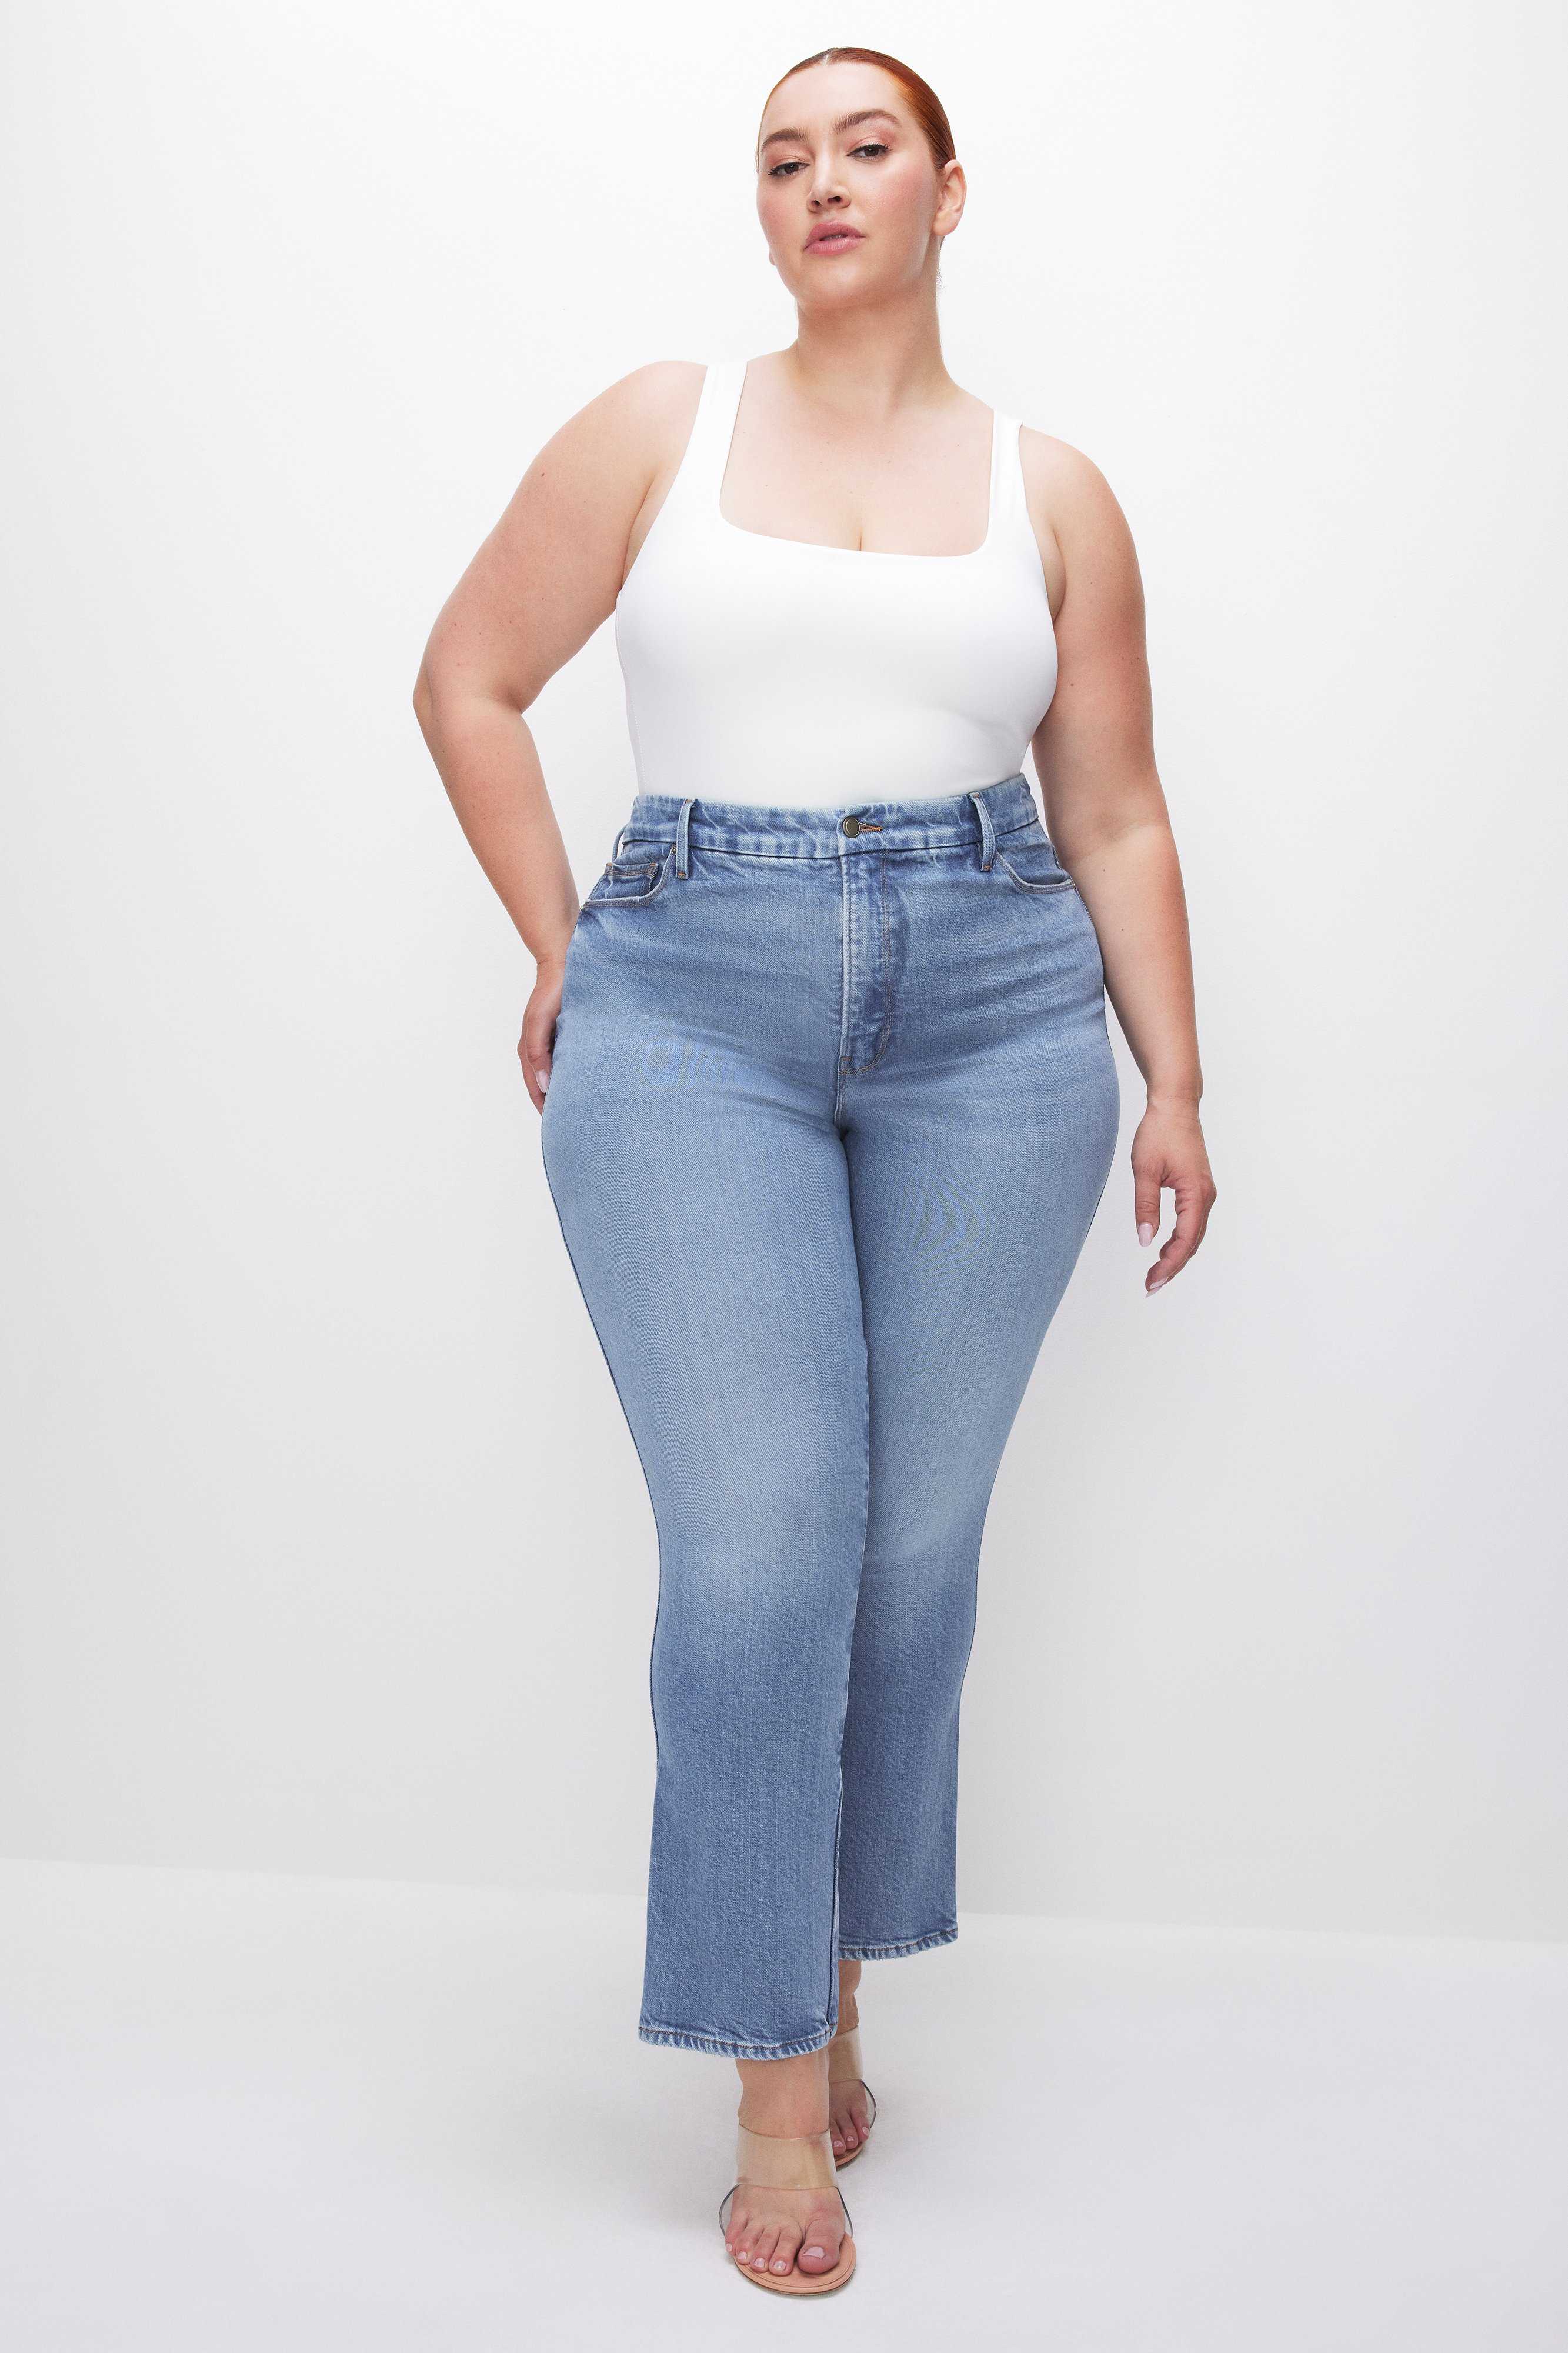 8 Best Jeans for Curvy Women, Tested and Reviewed | TIME Stamped